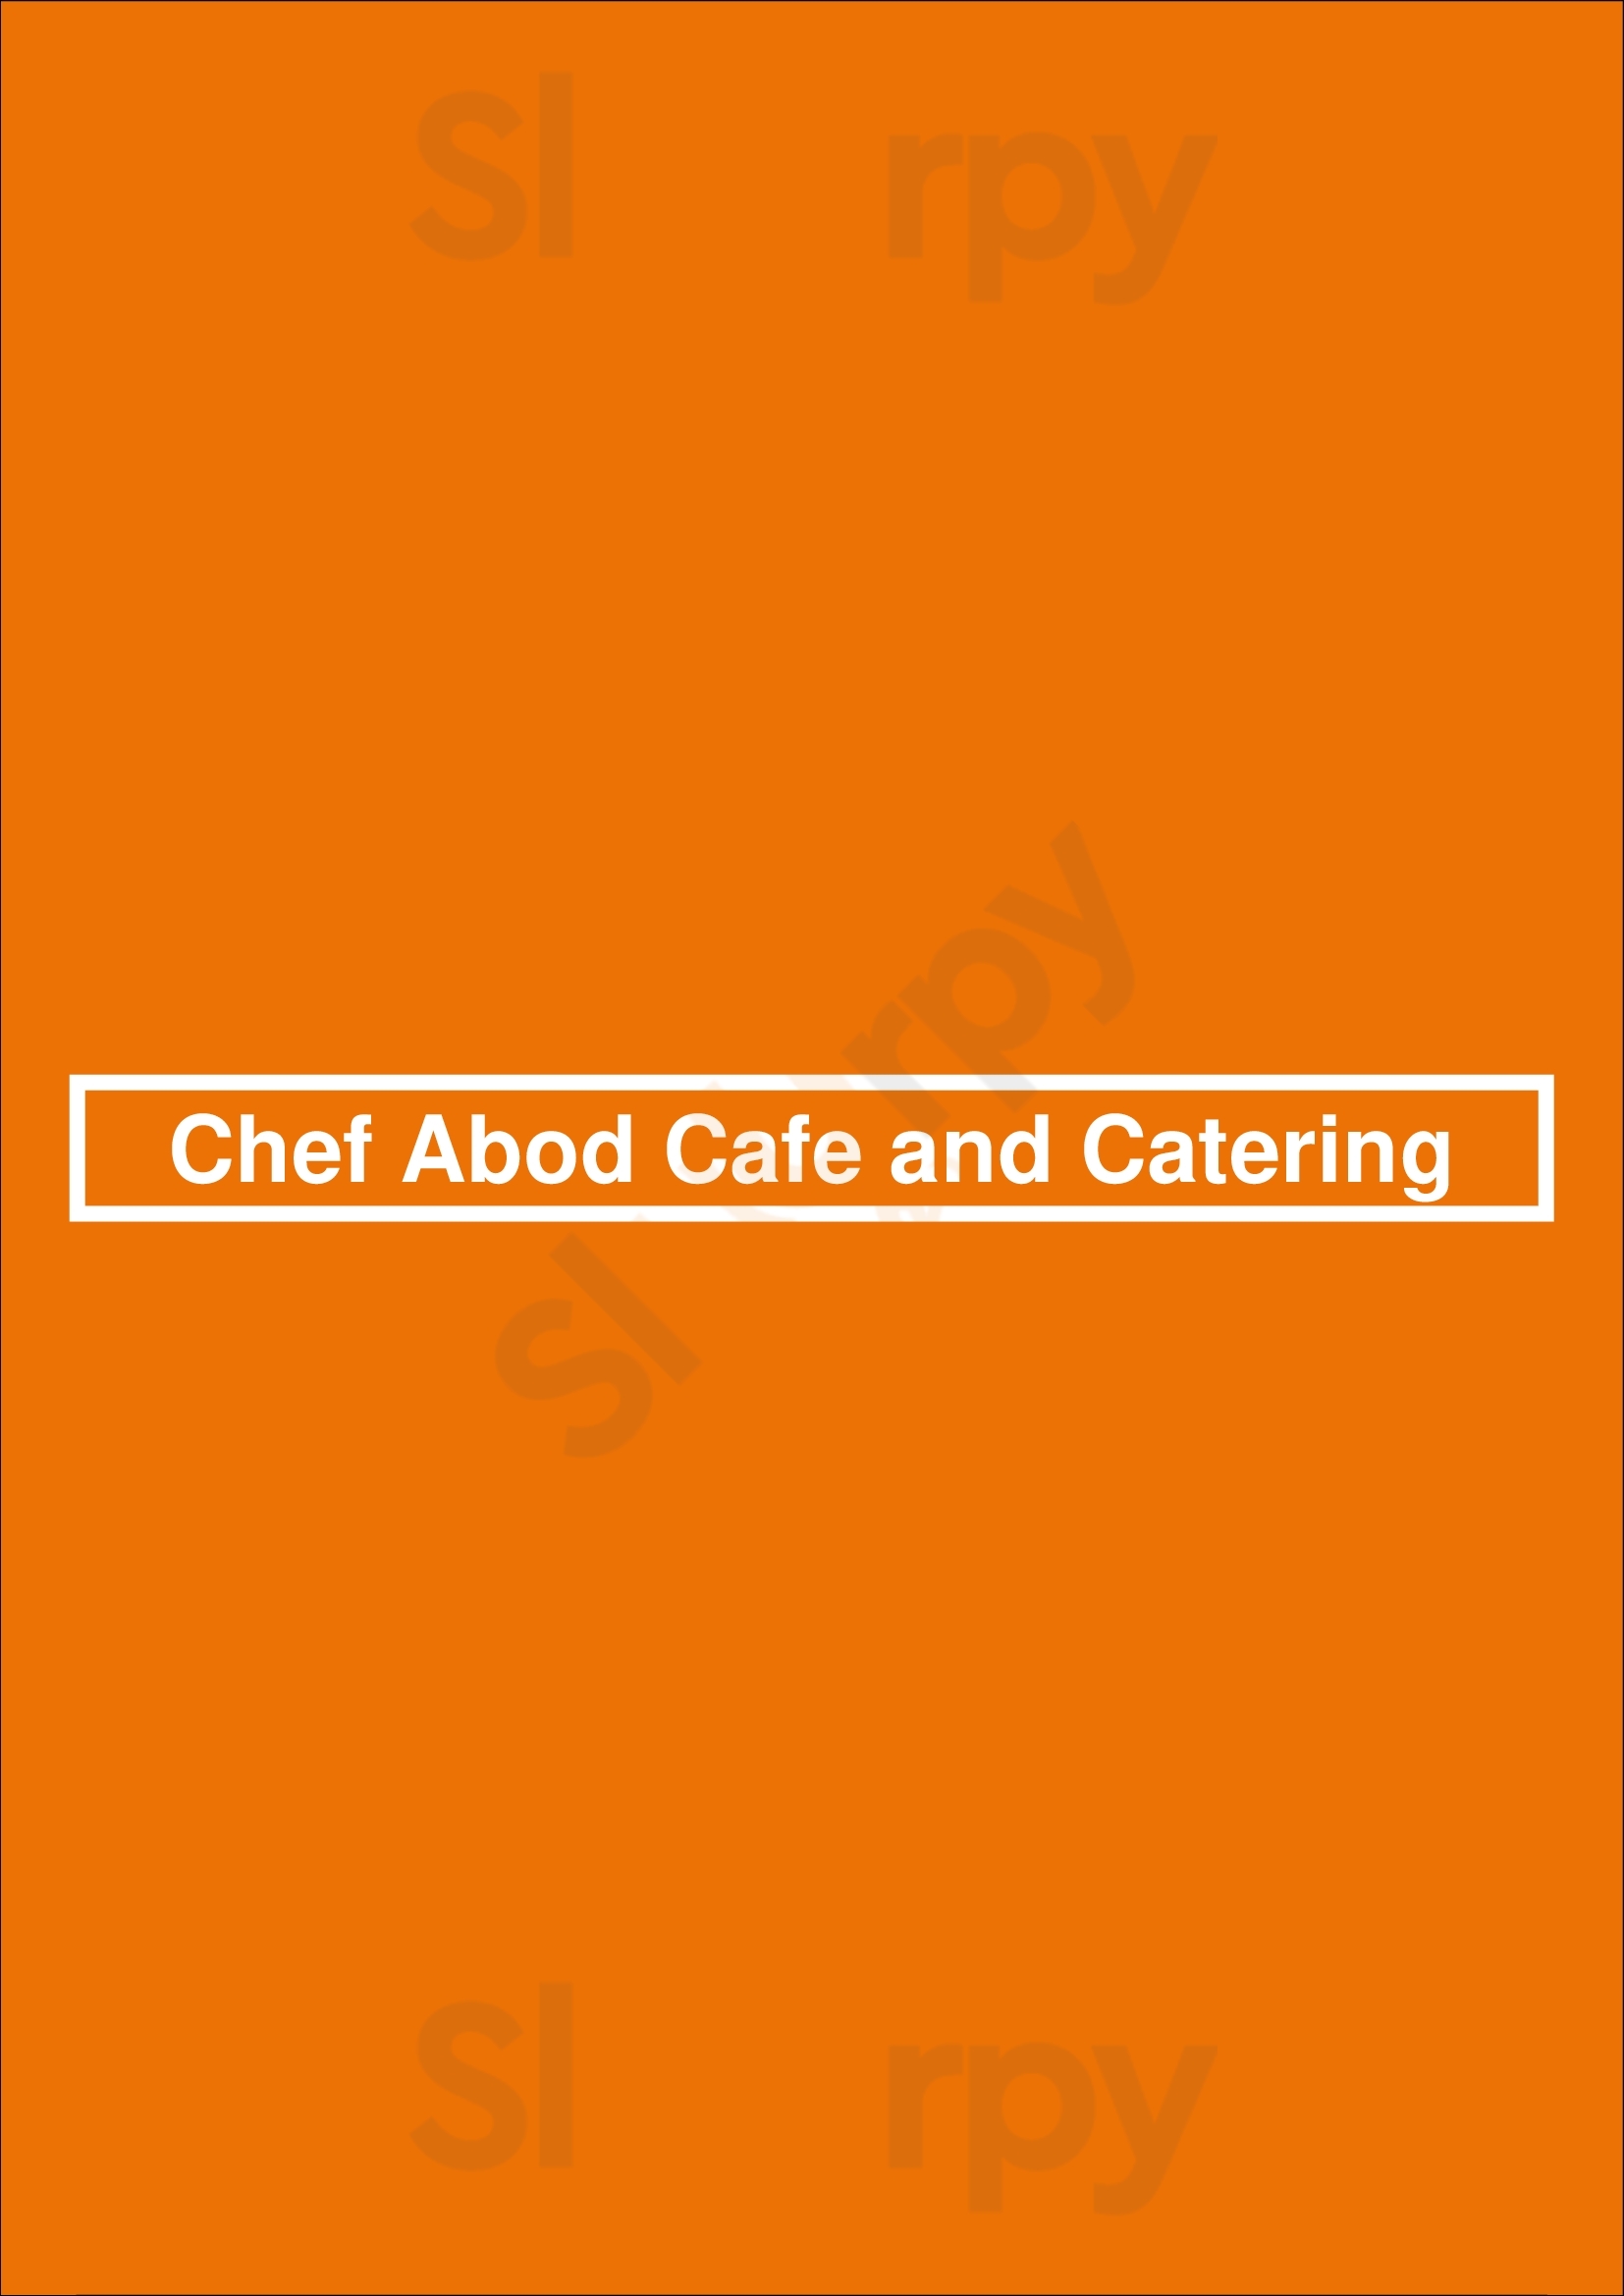 Chef Abod Cafe And Catering Halifax Menu - 1